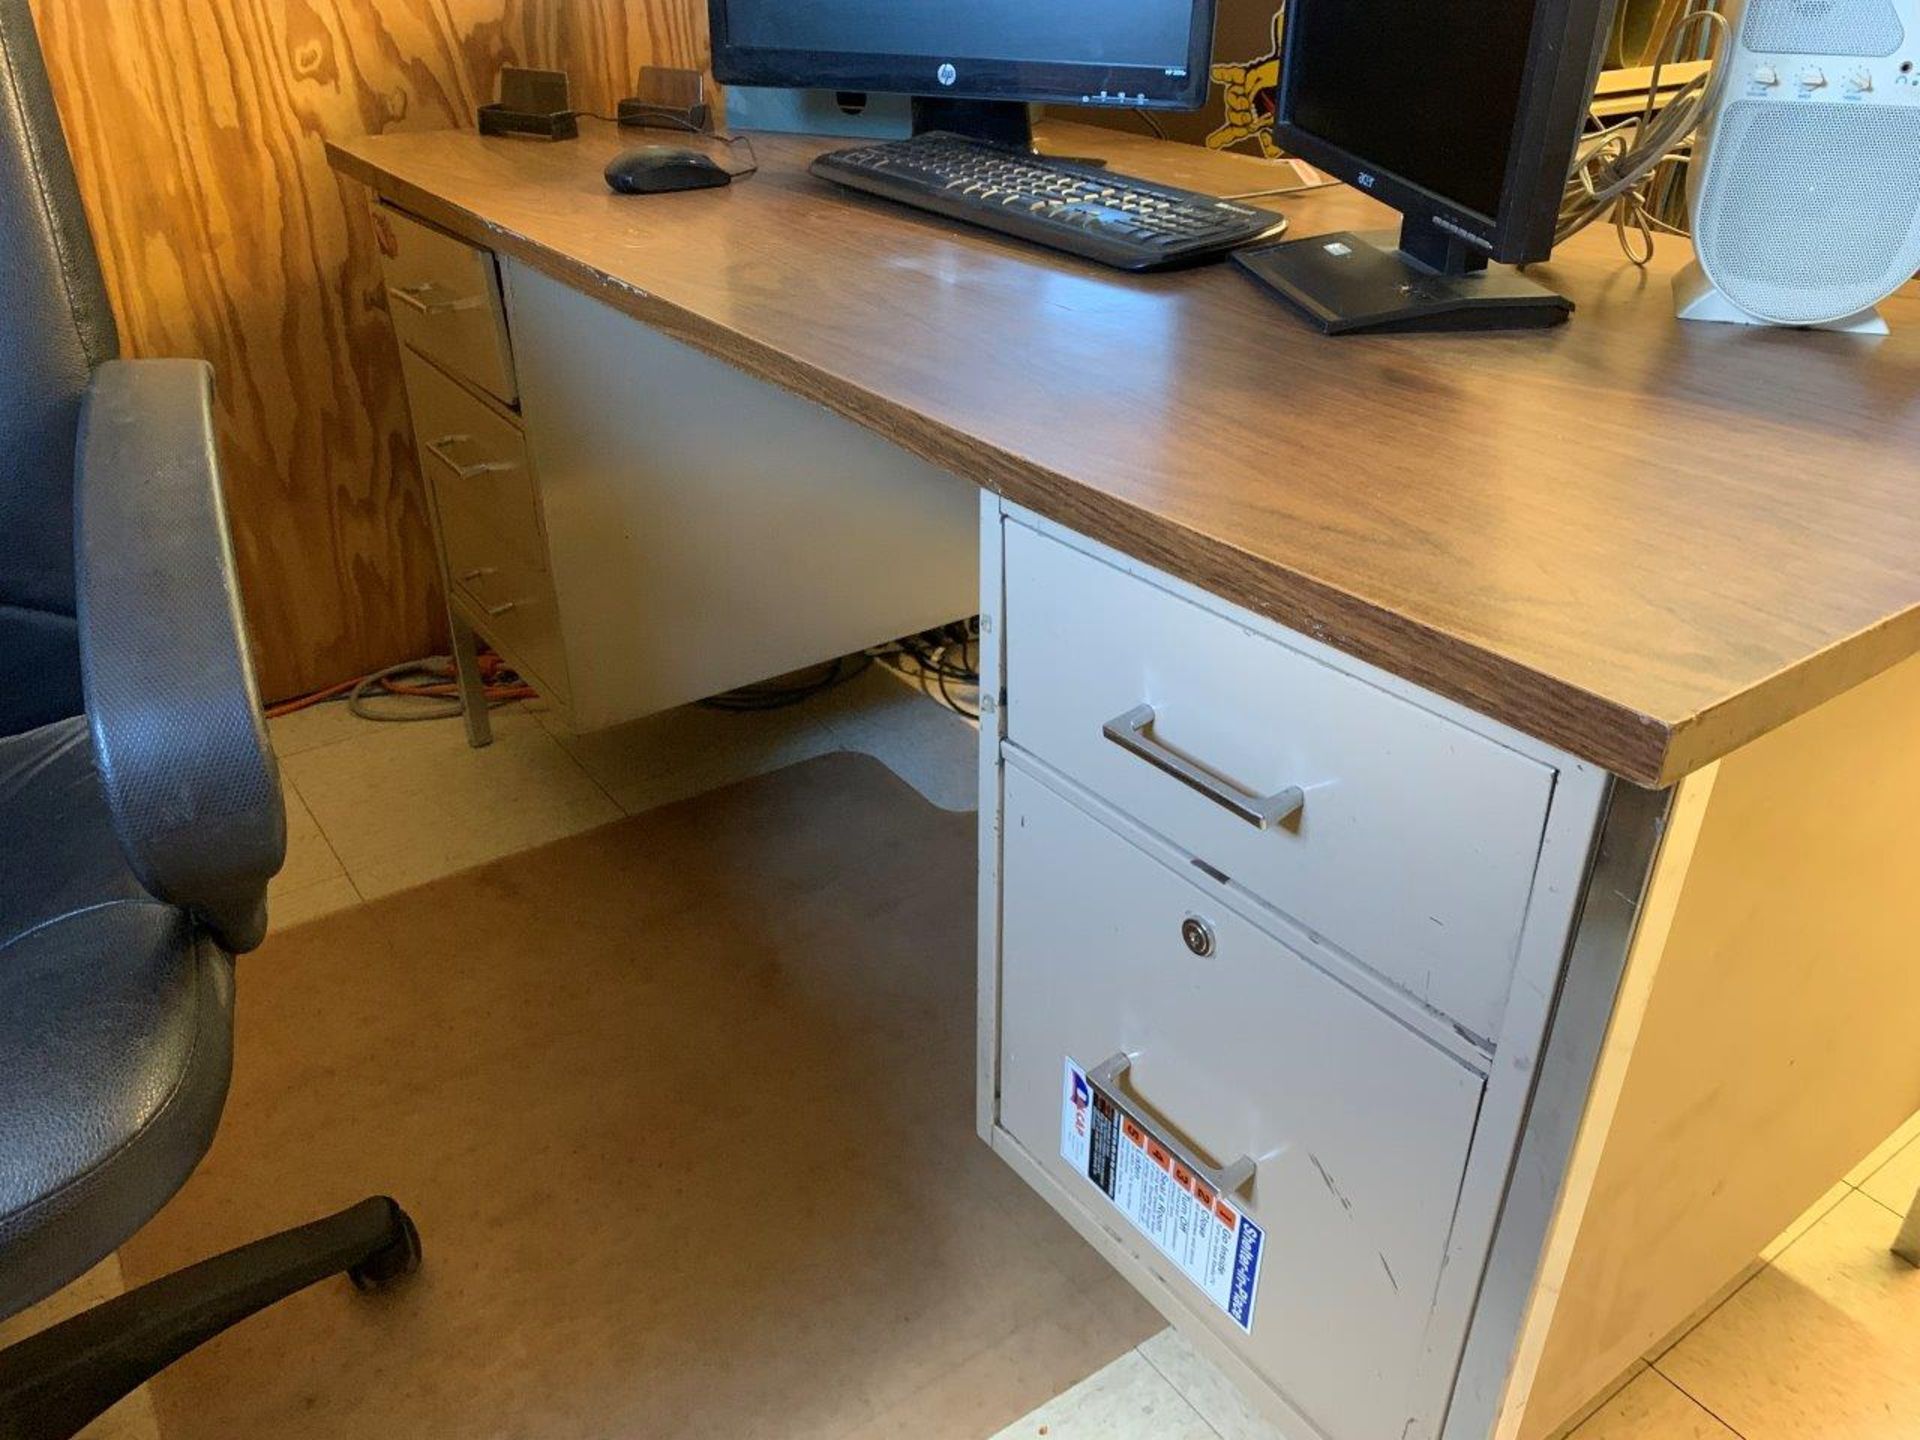 METAL OFFICE DESK W/ P-LAM TOP 60"W X 30"W X 28.5"H, OFFICE CHAIR (CONTENTS NOT INCLUDED) - Image 2 of 3